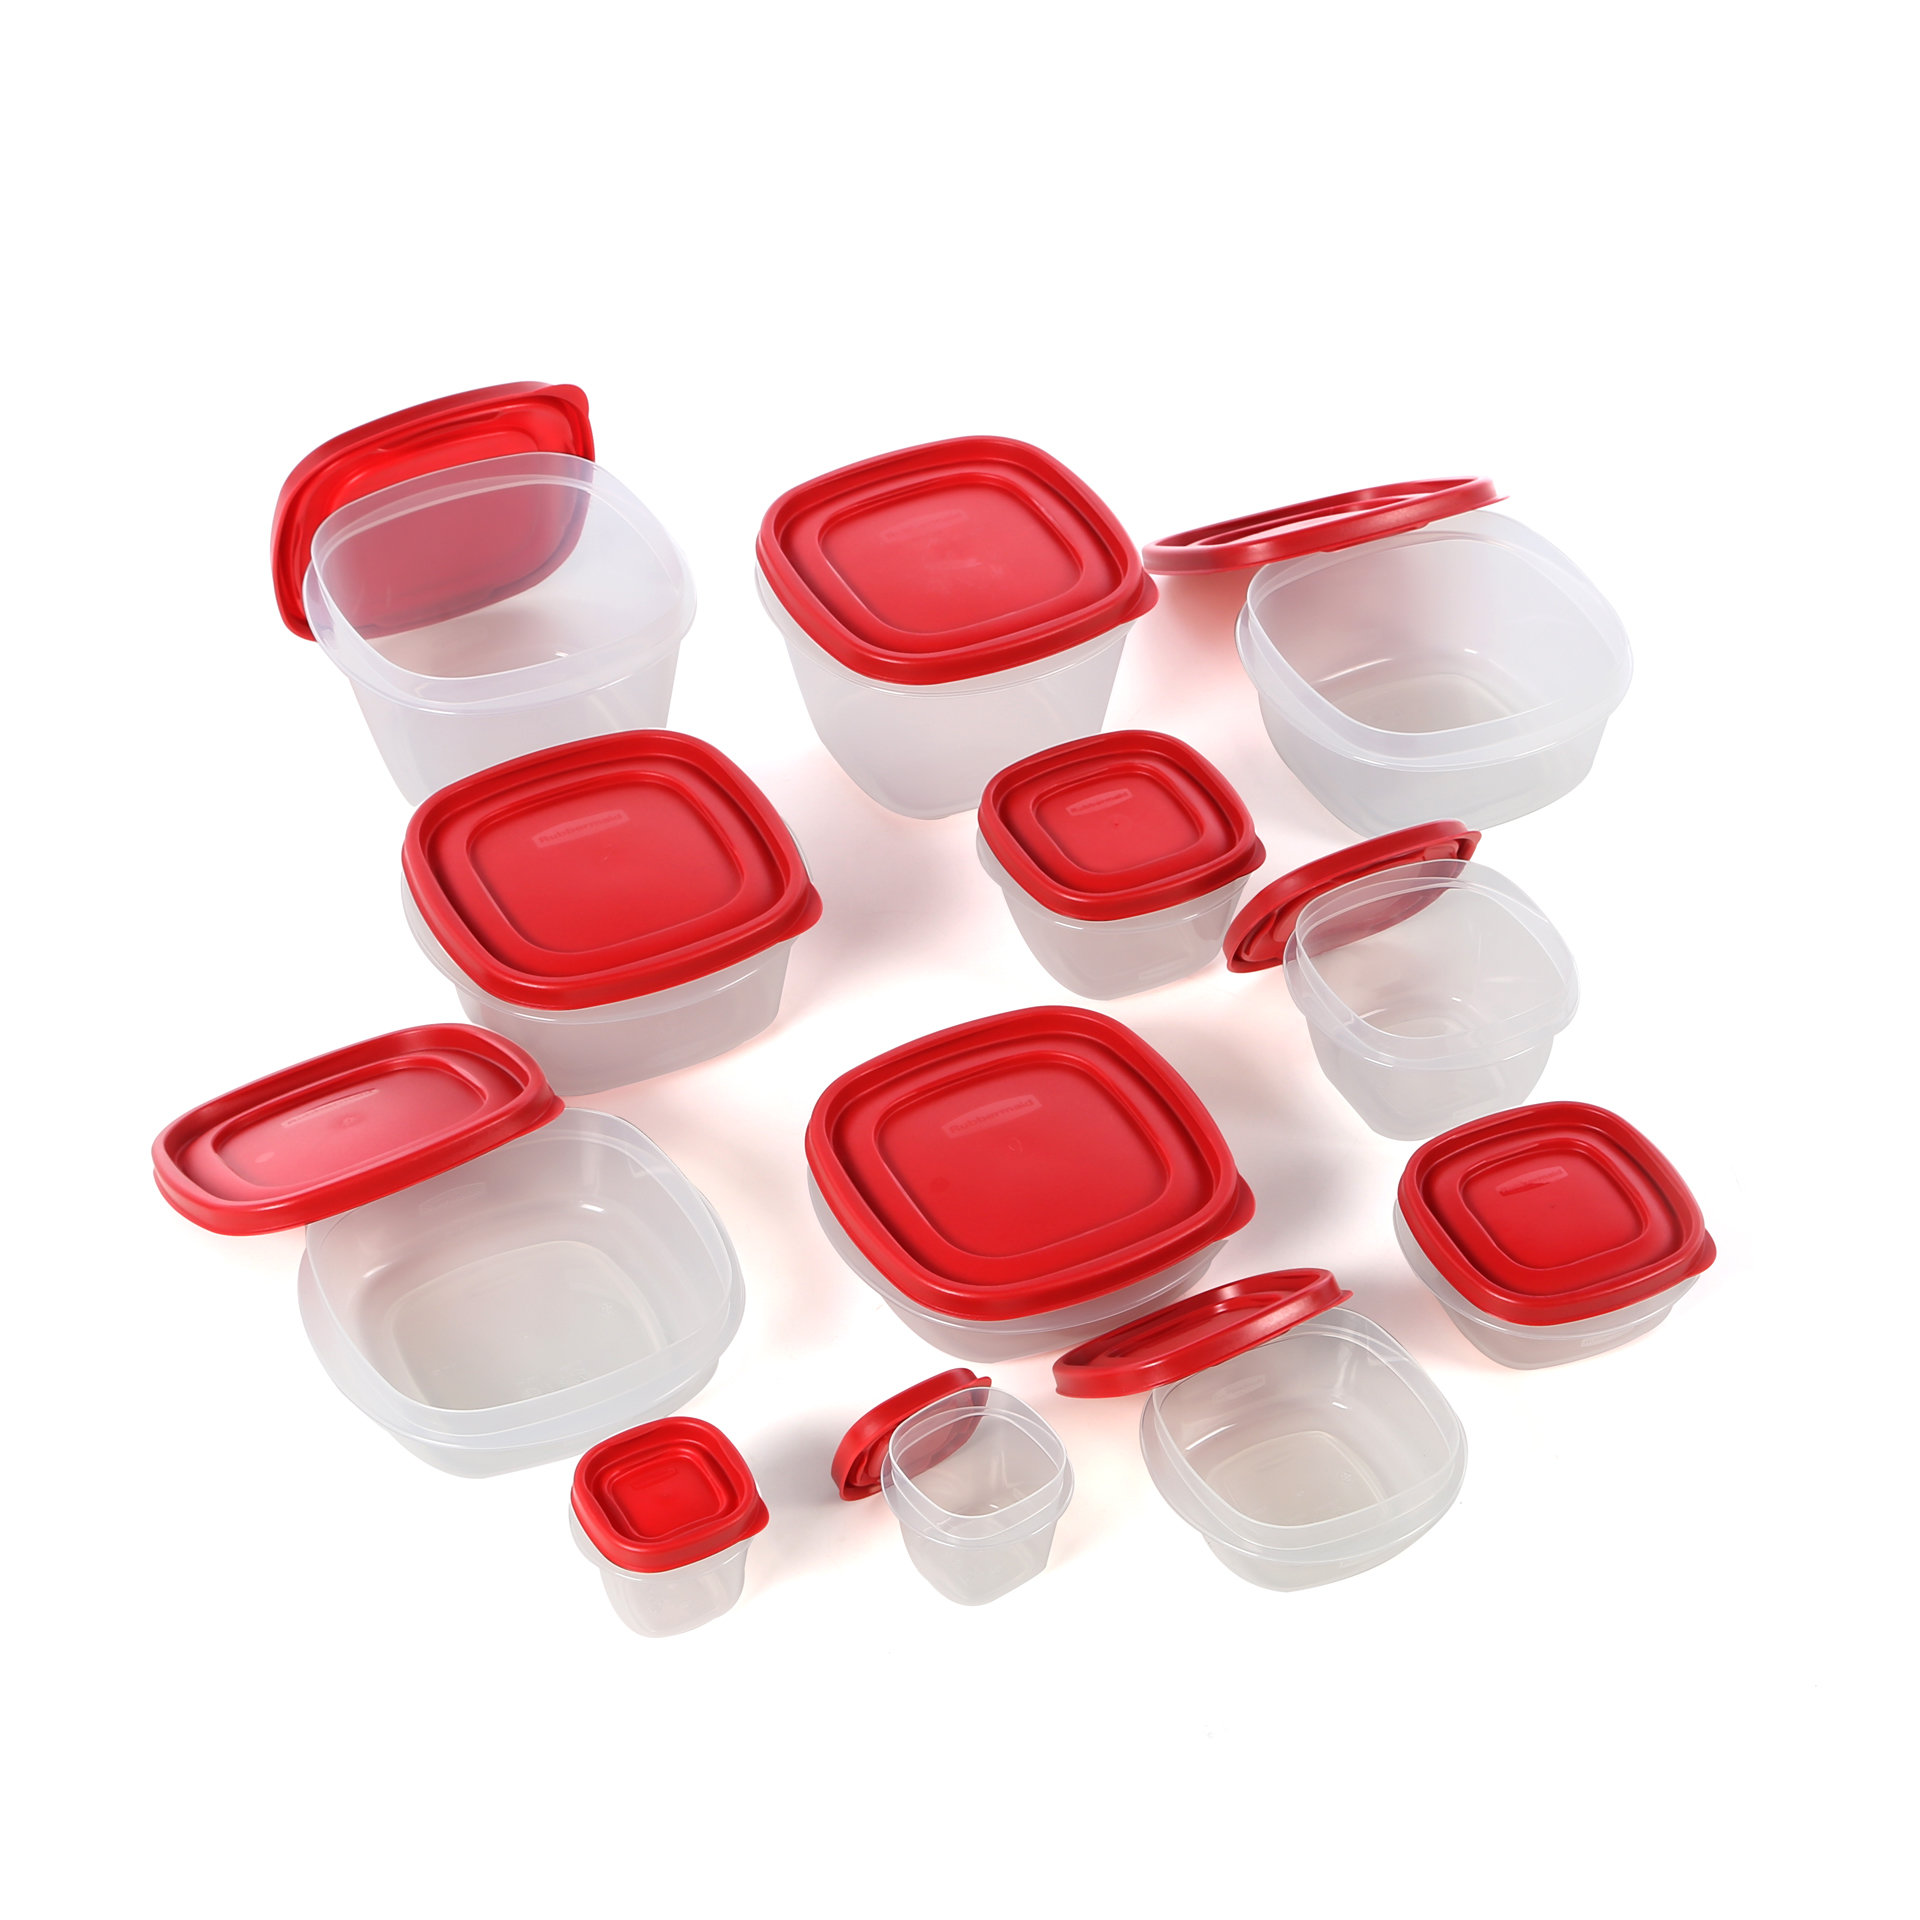 EASYLID 24PC SET RED - image 3 of 3